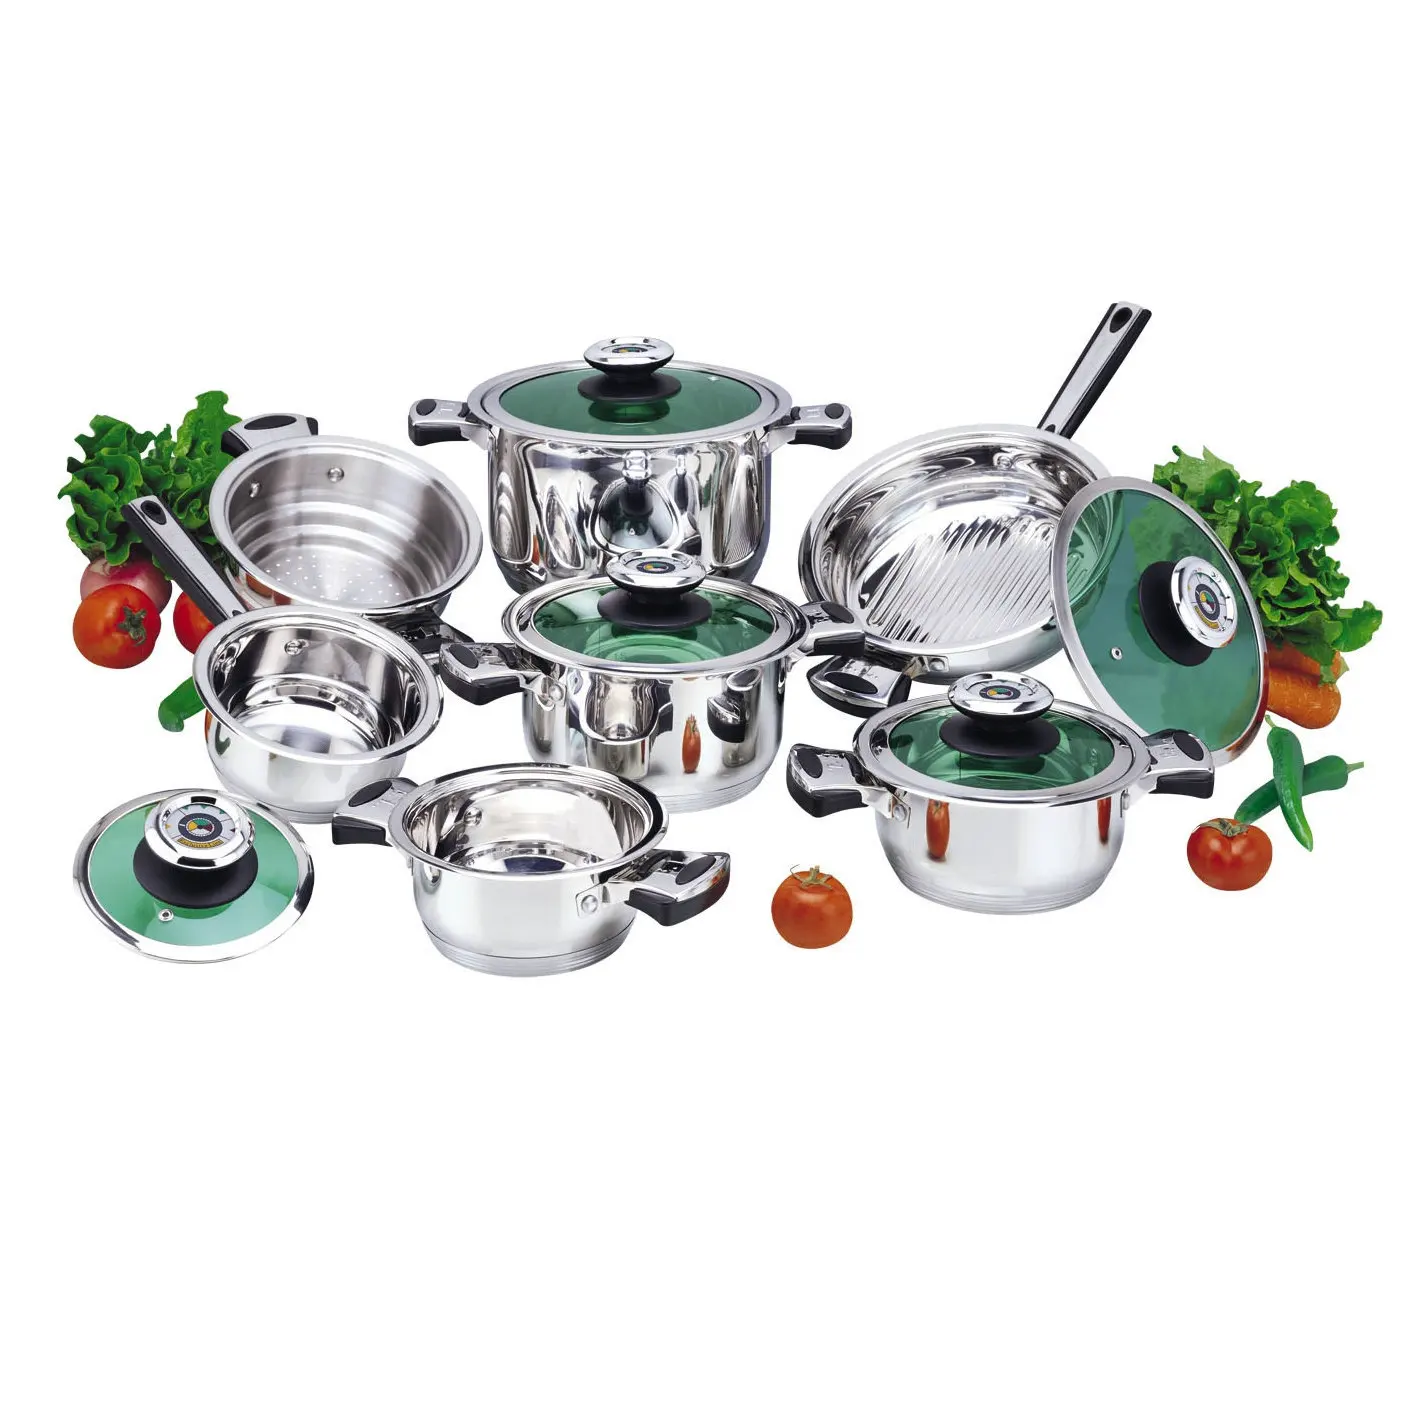 ready to ship 12pcs stainless steel cookware set with sandwich capsuled induction bottom and green glass lid (1600291971287)